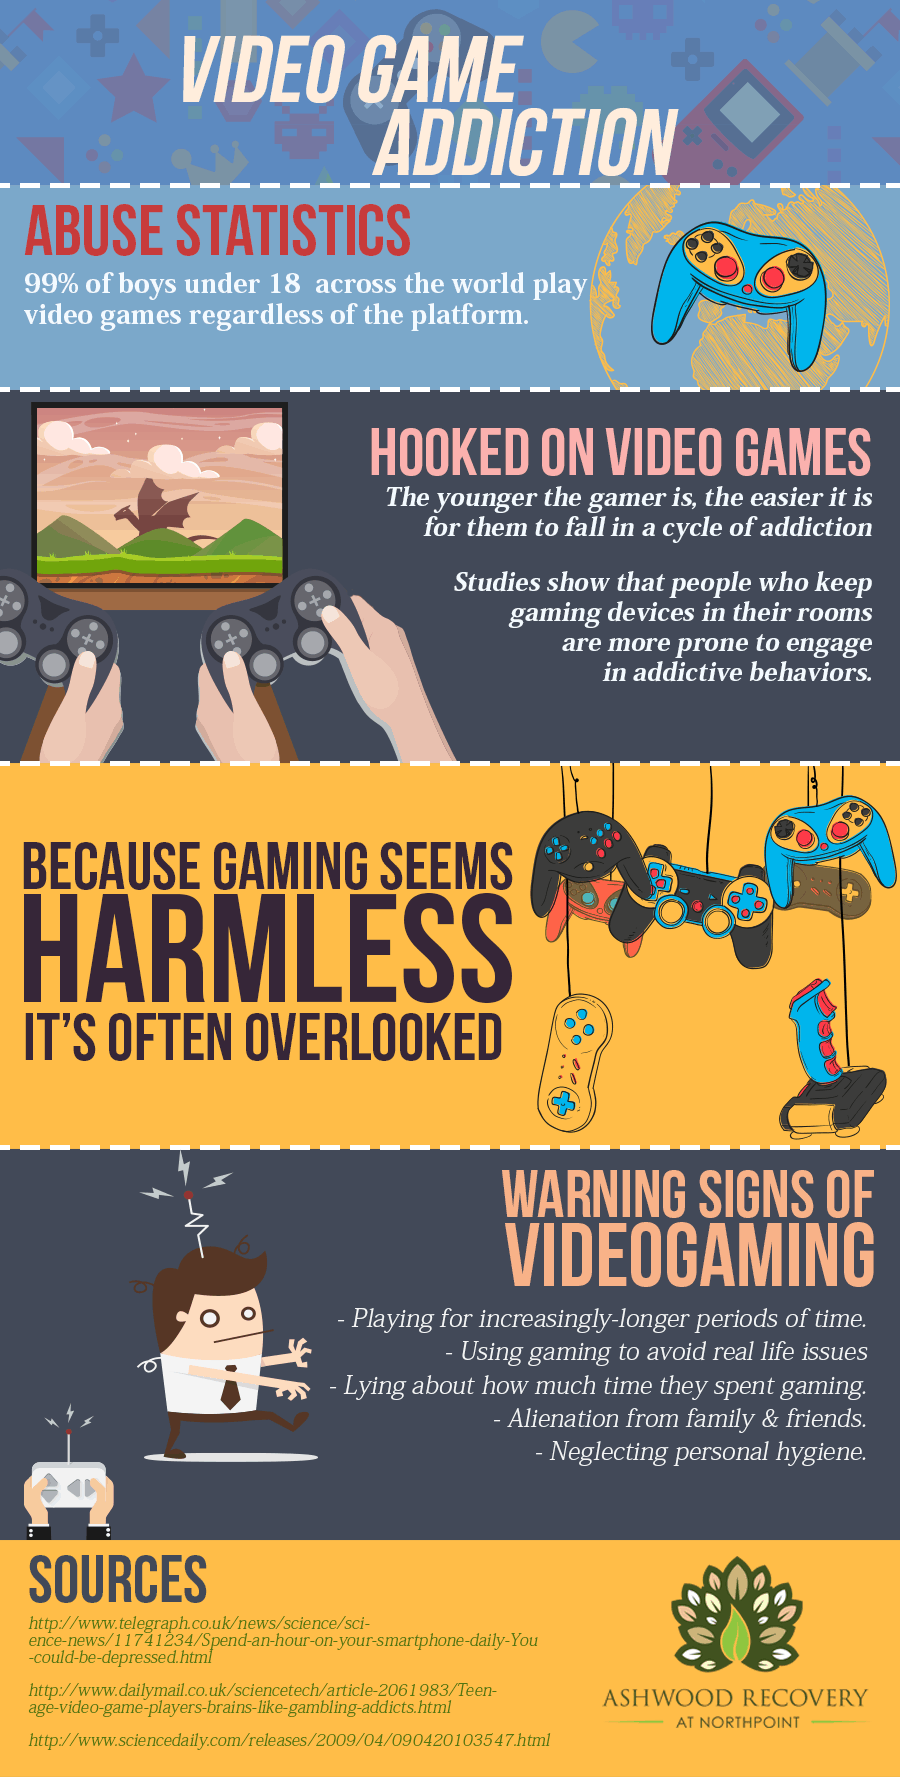 Signs of Video Game Addiction : r/StopGaming